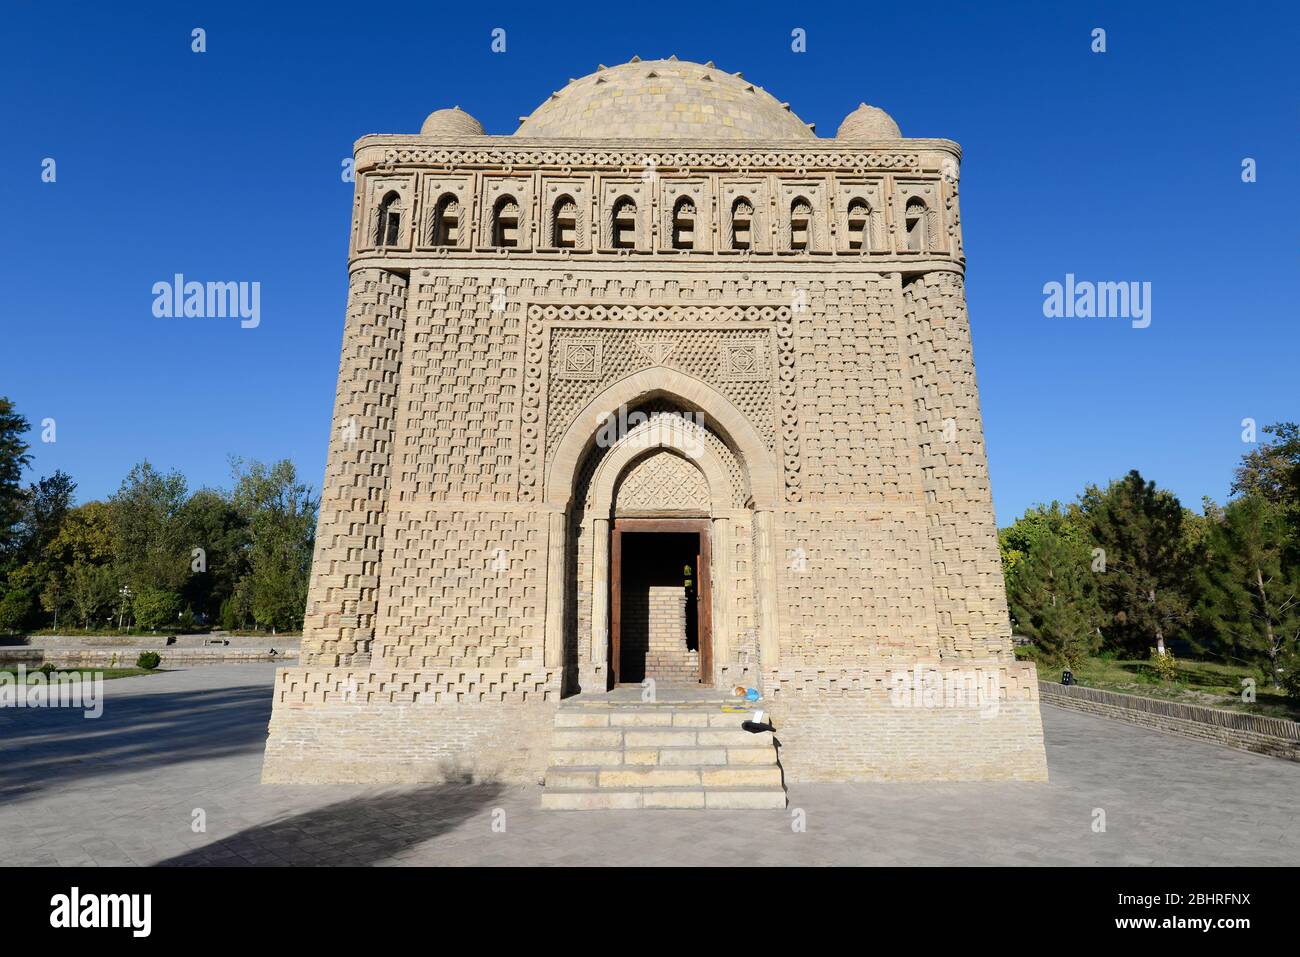 Samanid Mausoleum in Bukhara, Uzbekistan. Iconic example of the early Islamic architecture in Asia. Oldest funerary building in Central Asia. Stock Photo